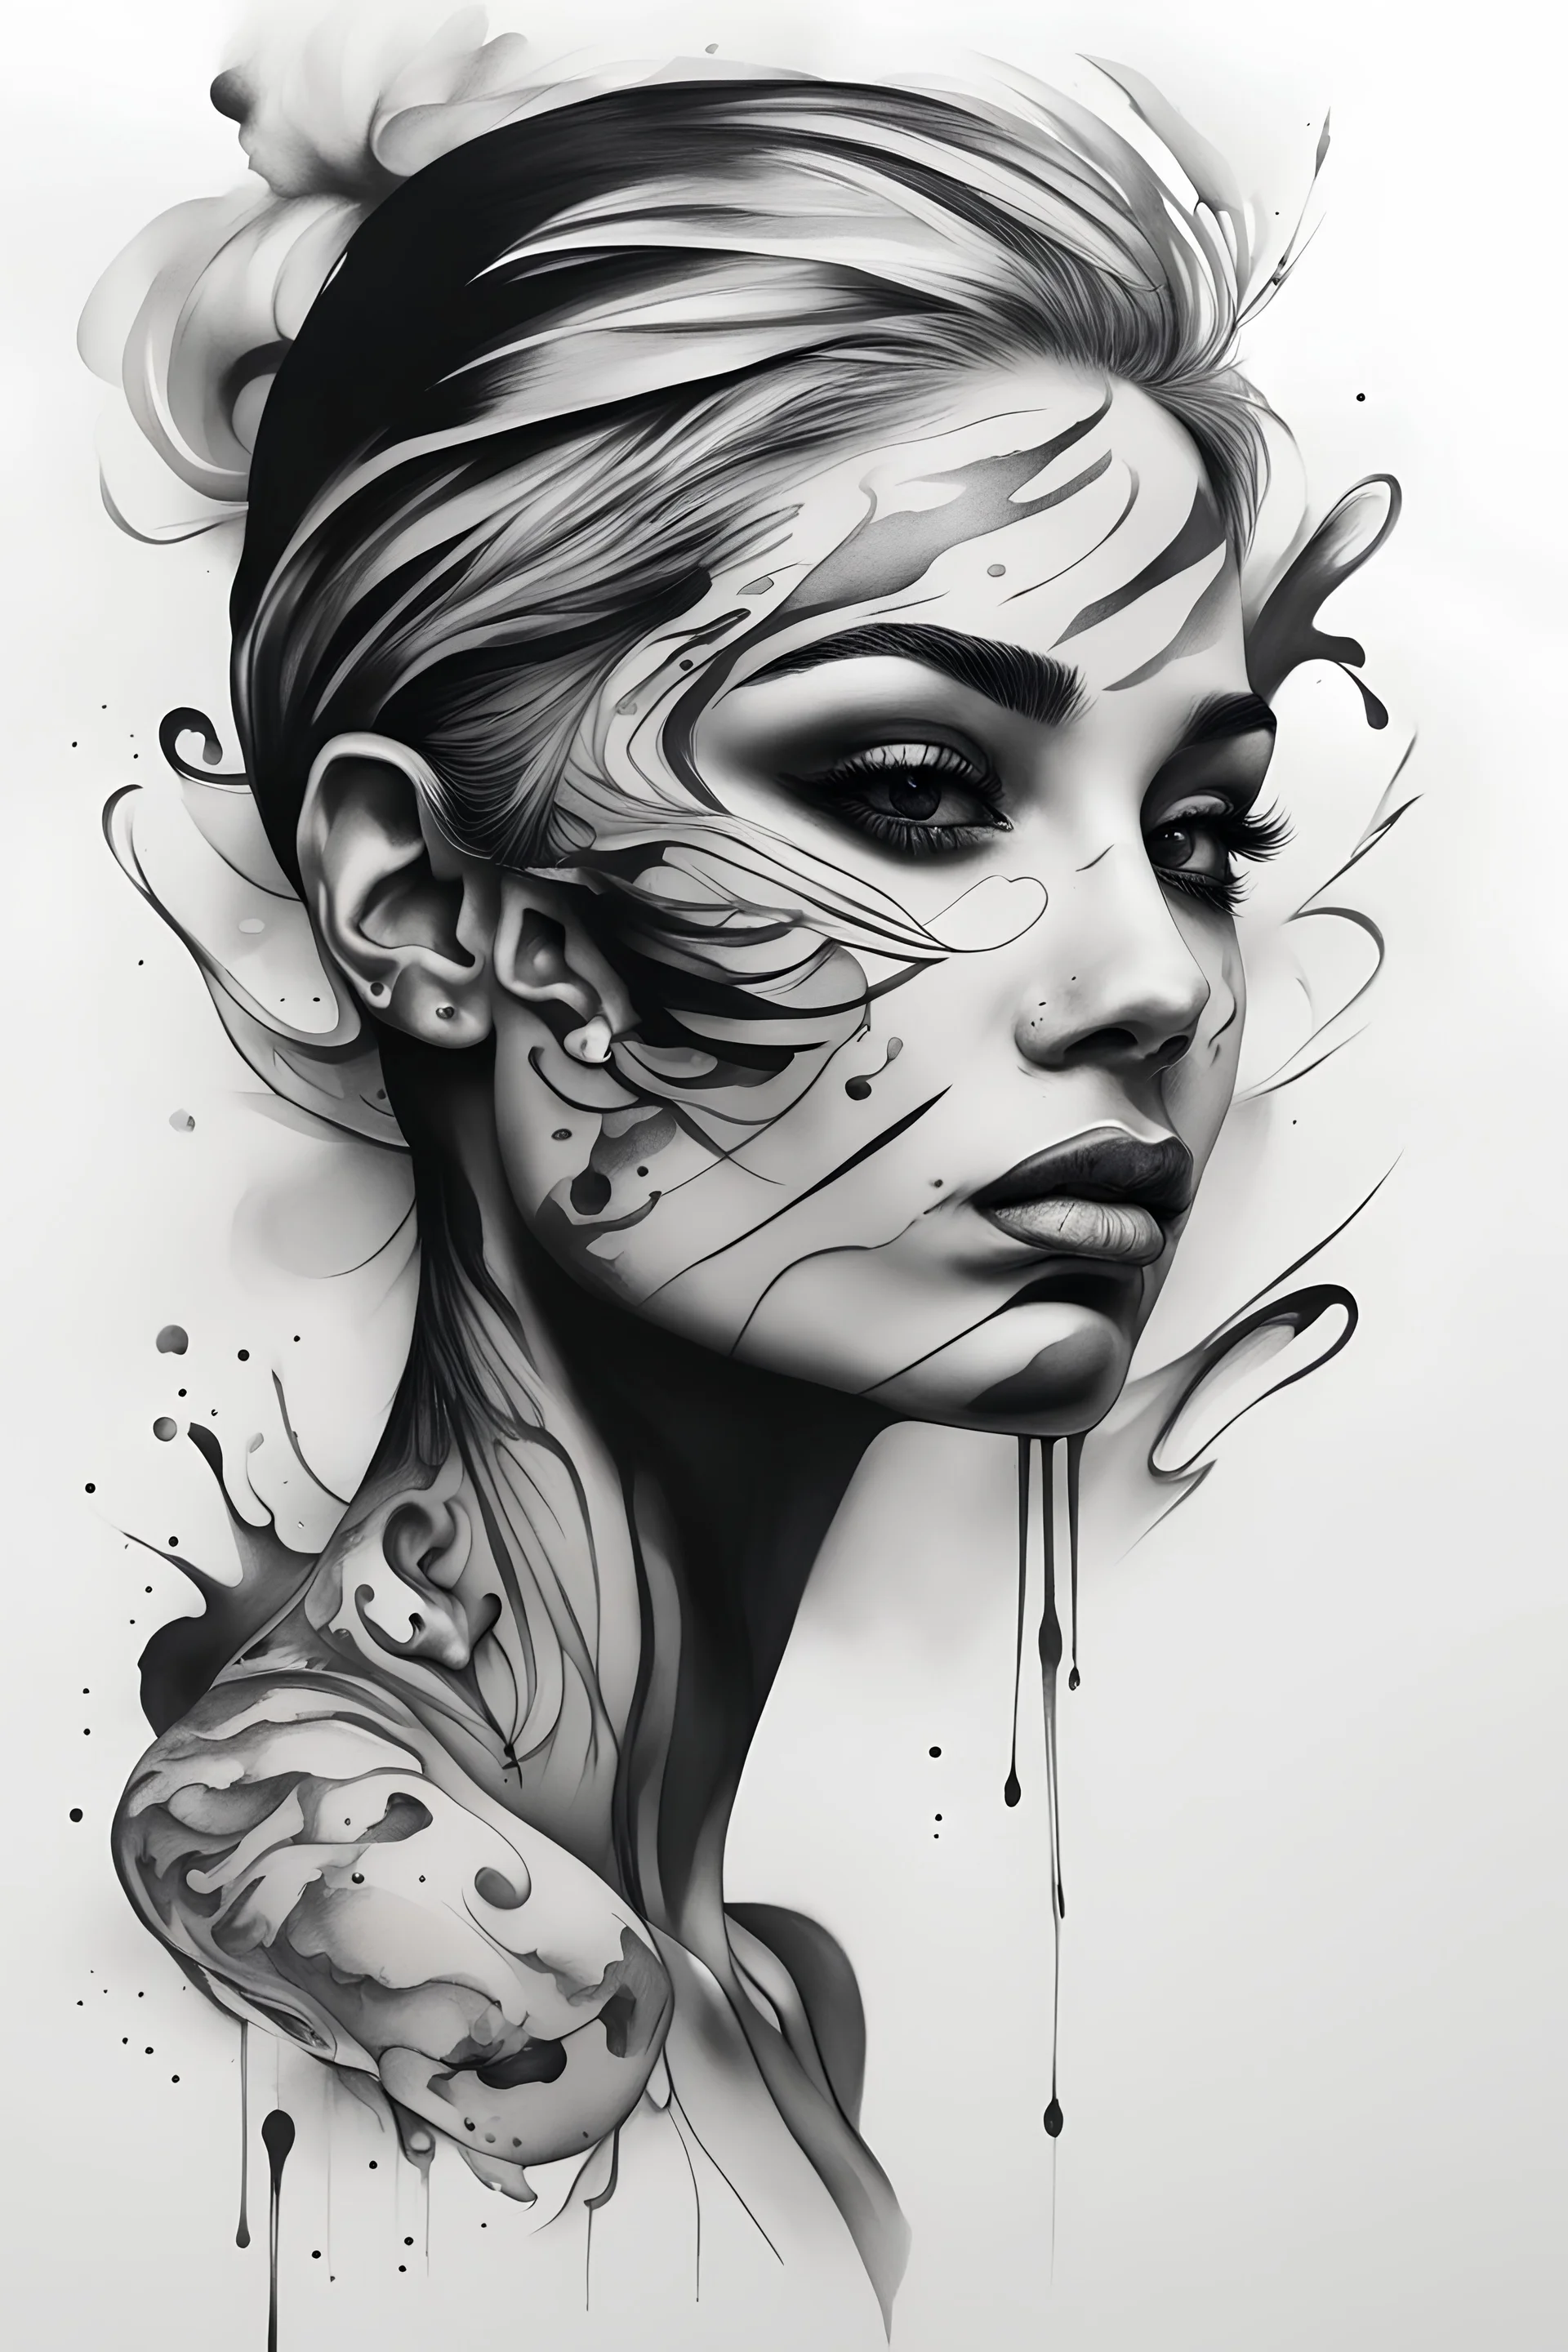 A realistic drawing in negative space black ink on white background of a beautiful women with abstract brushstrokes face tattoos to enhance her face